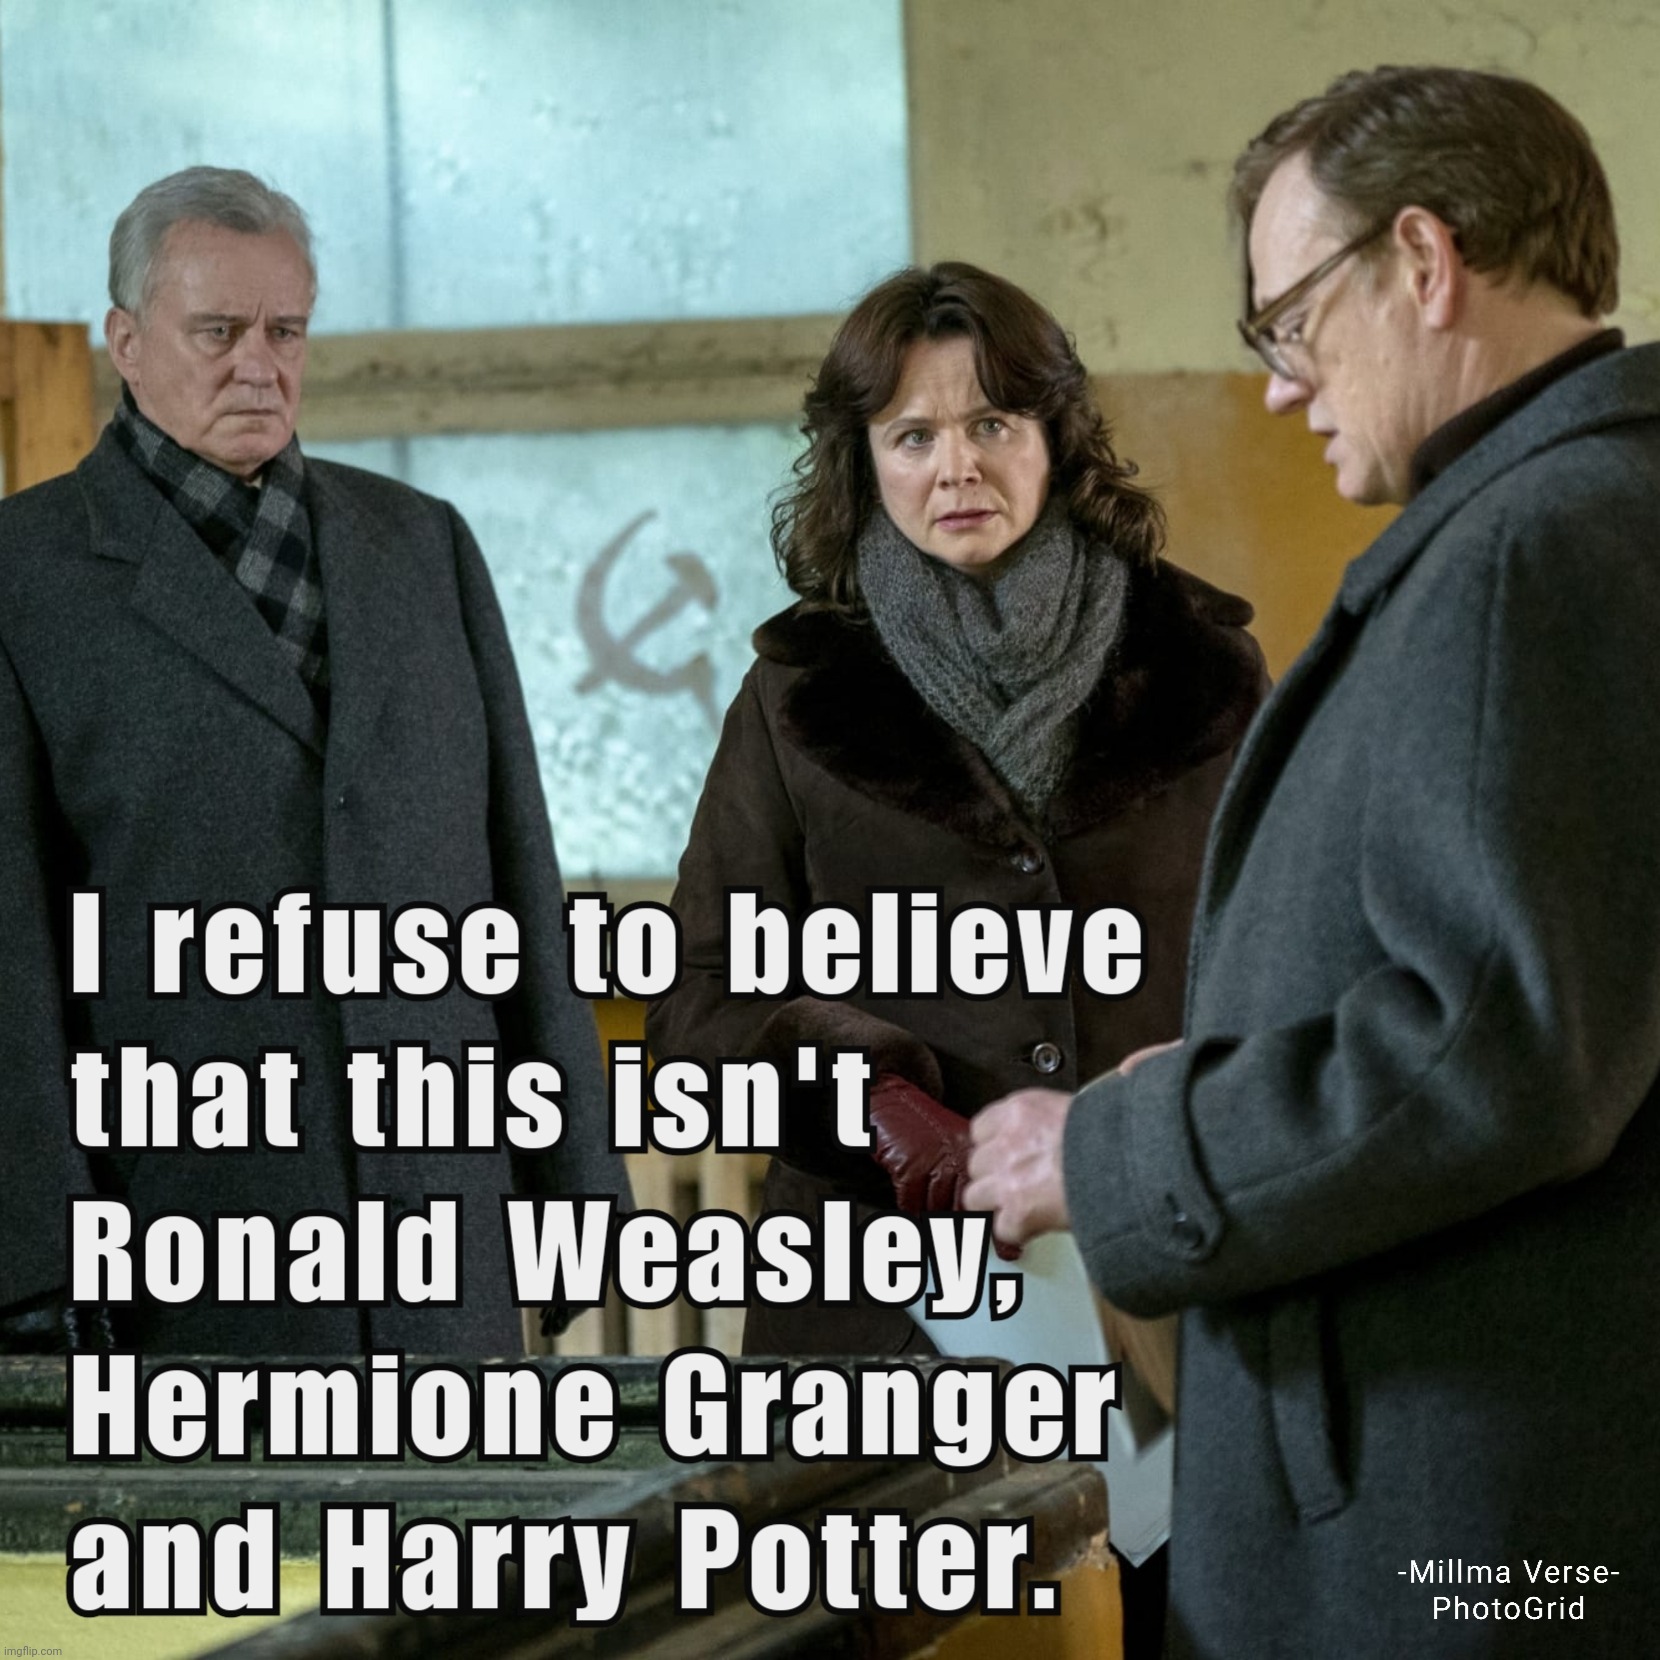 Chernobyl Harry Potter | image tagged in harry potter,chernobyl,hermione granger,ron weasley,funny memes | made w/ Imgflip meme maker